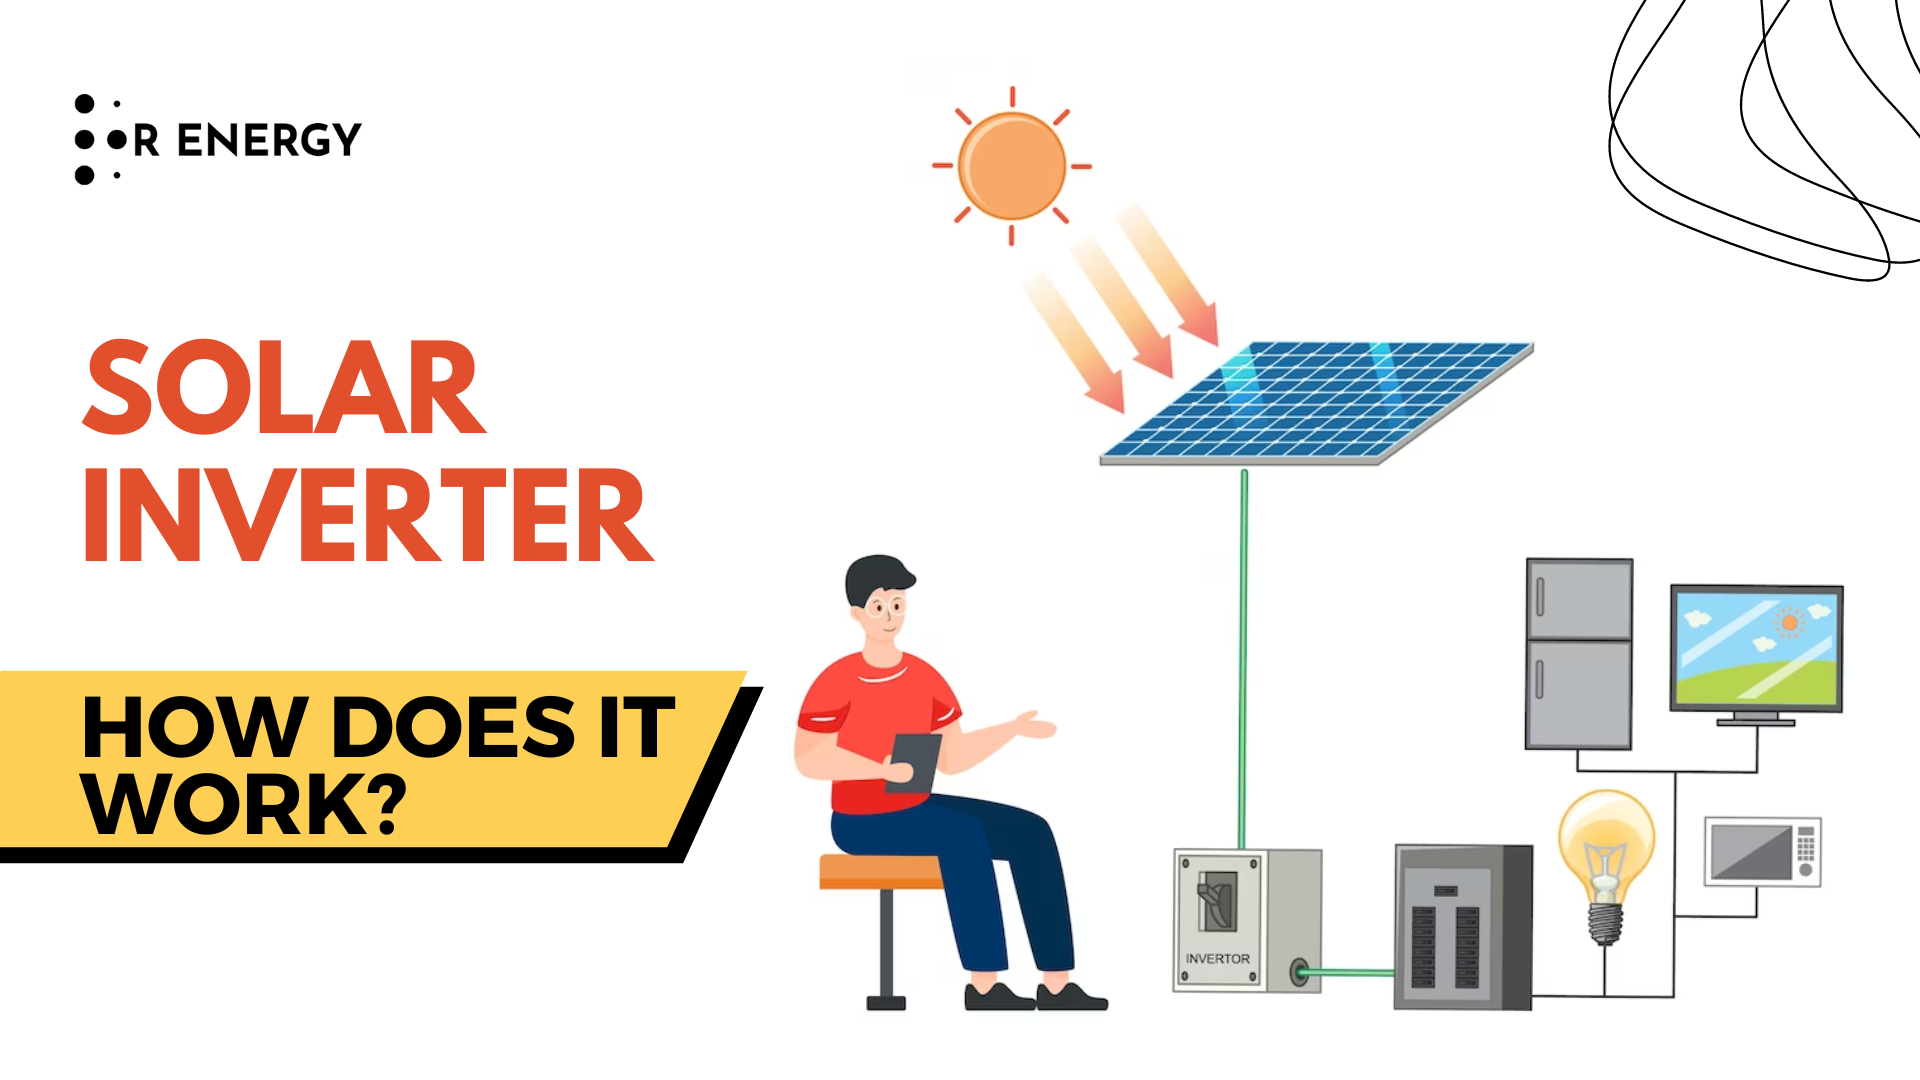 https://renergyinfo.com/what-exactly-is-a-solar-inverter-types-and-how-does-it-work/